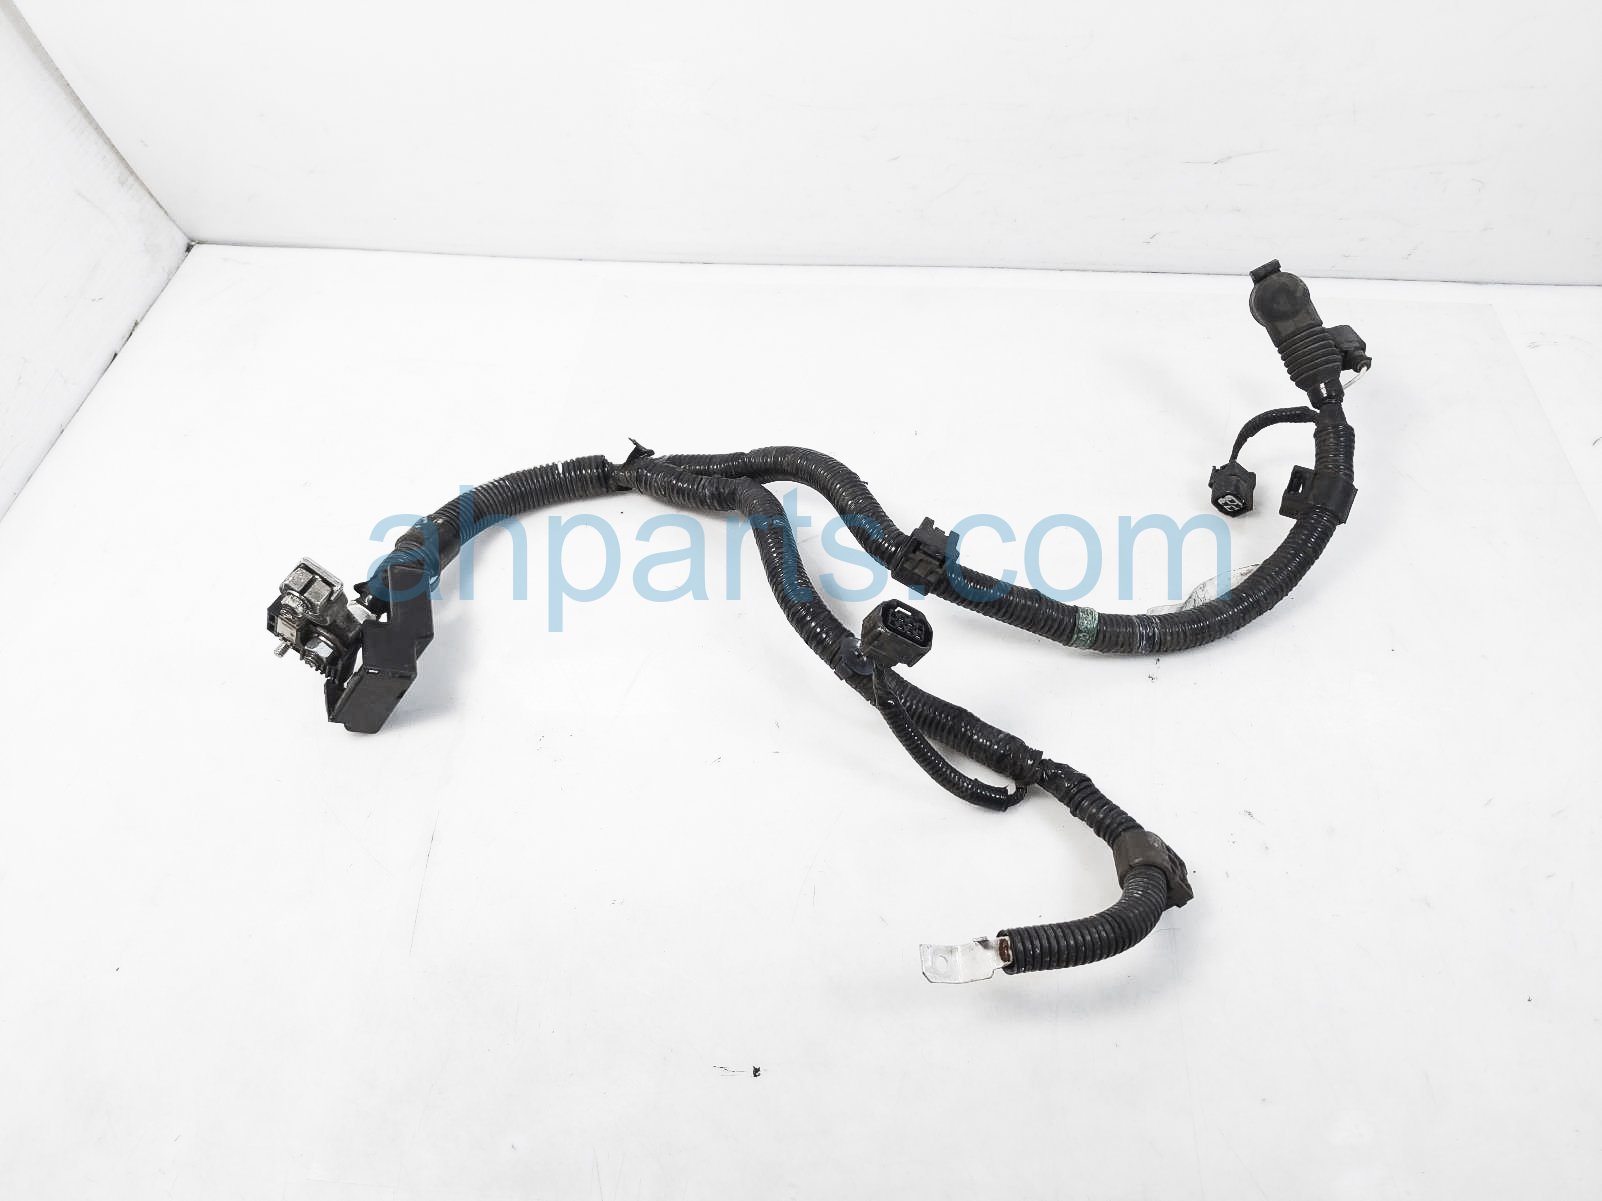 $50 Acura BATTERY STARTER WIRE HARNESS